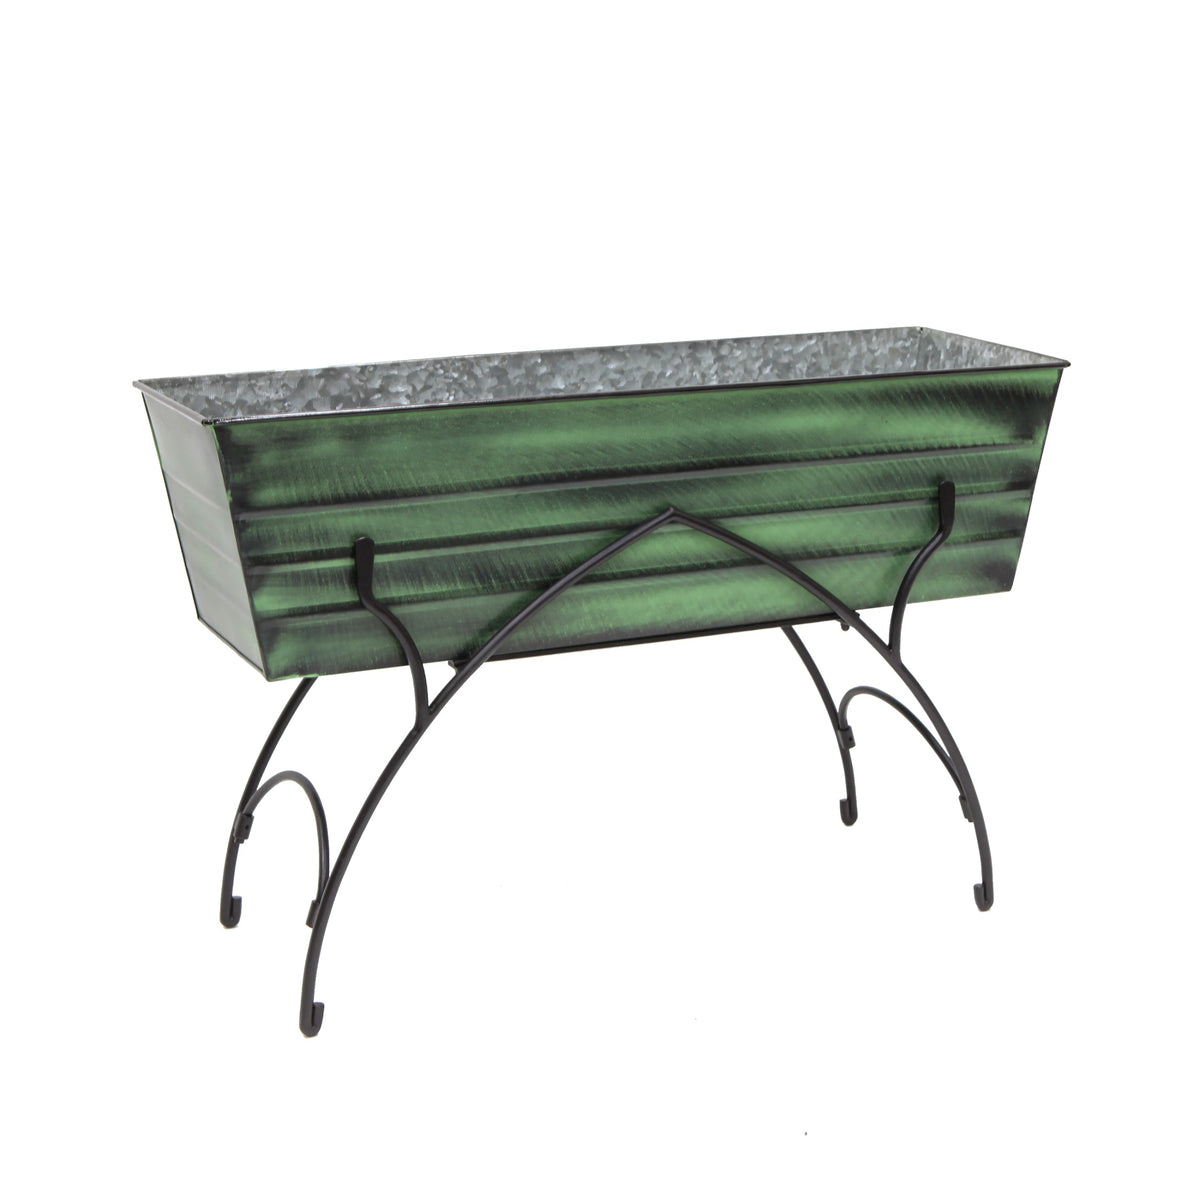 36&quot; Green Flower Box with Bella Stand Flower Box